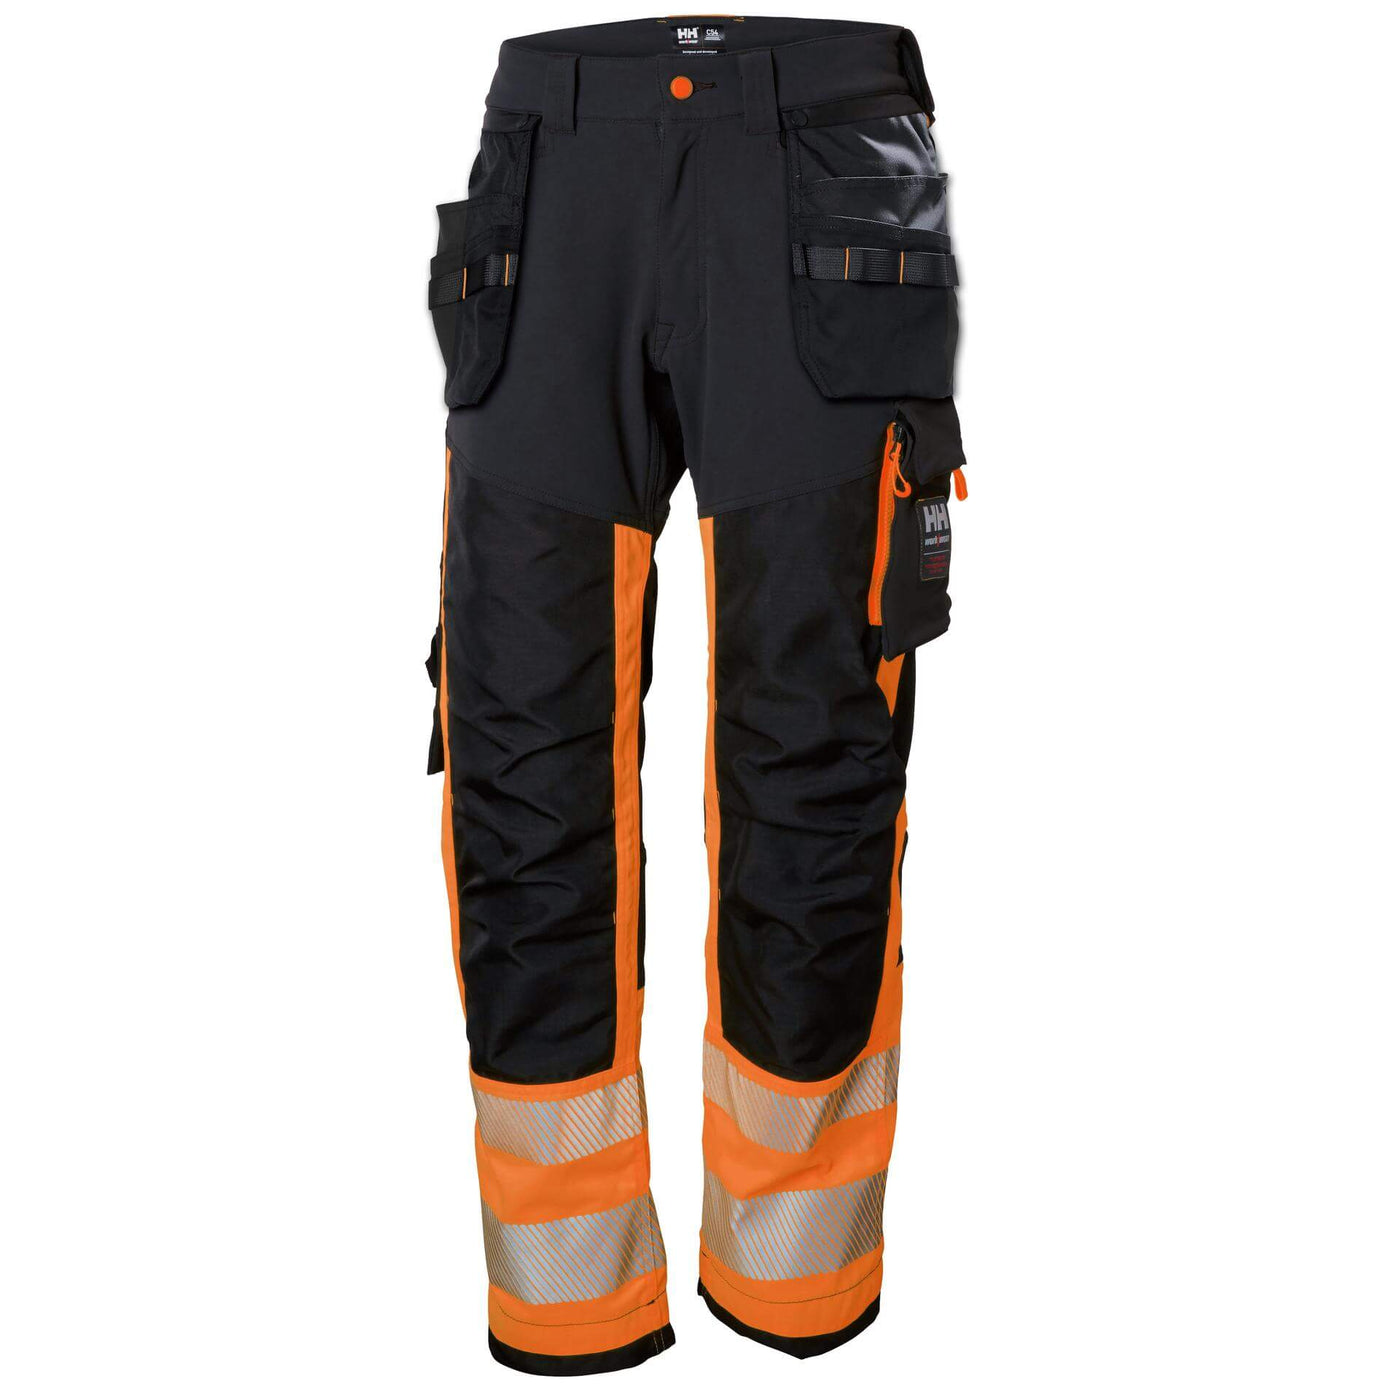 Mens Work Trousers | Snickers, Blaklader, Dickies, Scruffs, Fristads |  TuffShop.co.uk